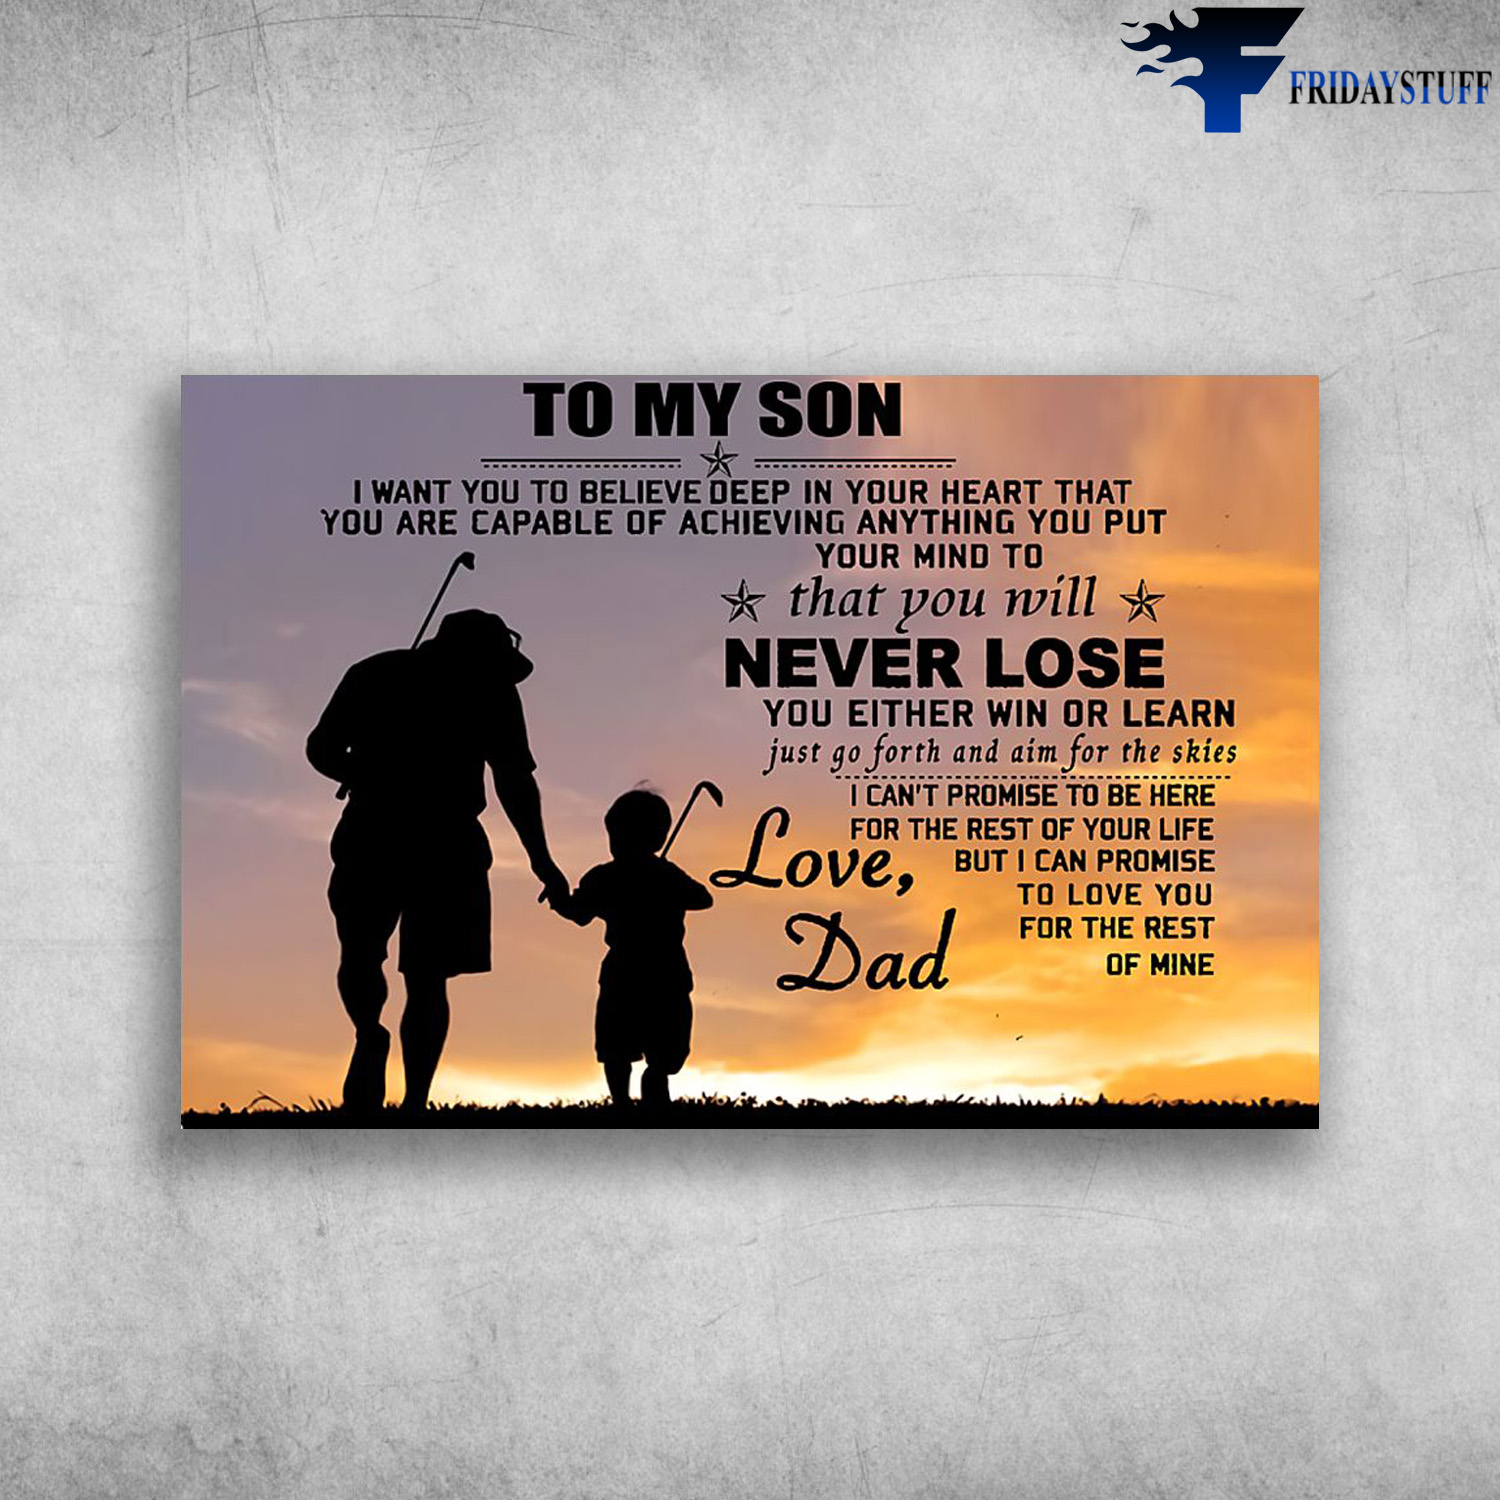 Dad And Son Play Golf - To My Son, I Want You To Believe Deep In Your Heart, That You Are Capable Of Achieving Anything You Put Your Mind To, That You Will Never Lose, You Either Win Or Learn, Just Go Forth And Aim For The Skies